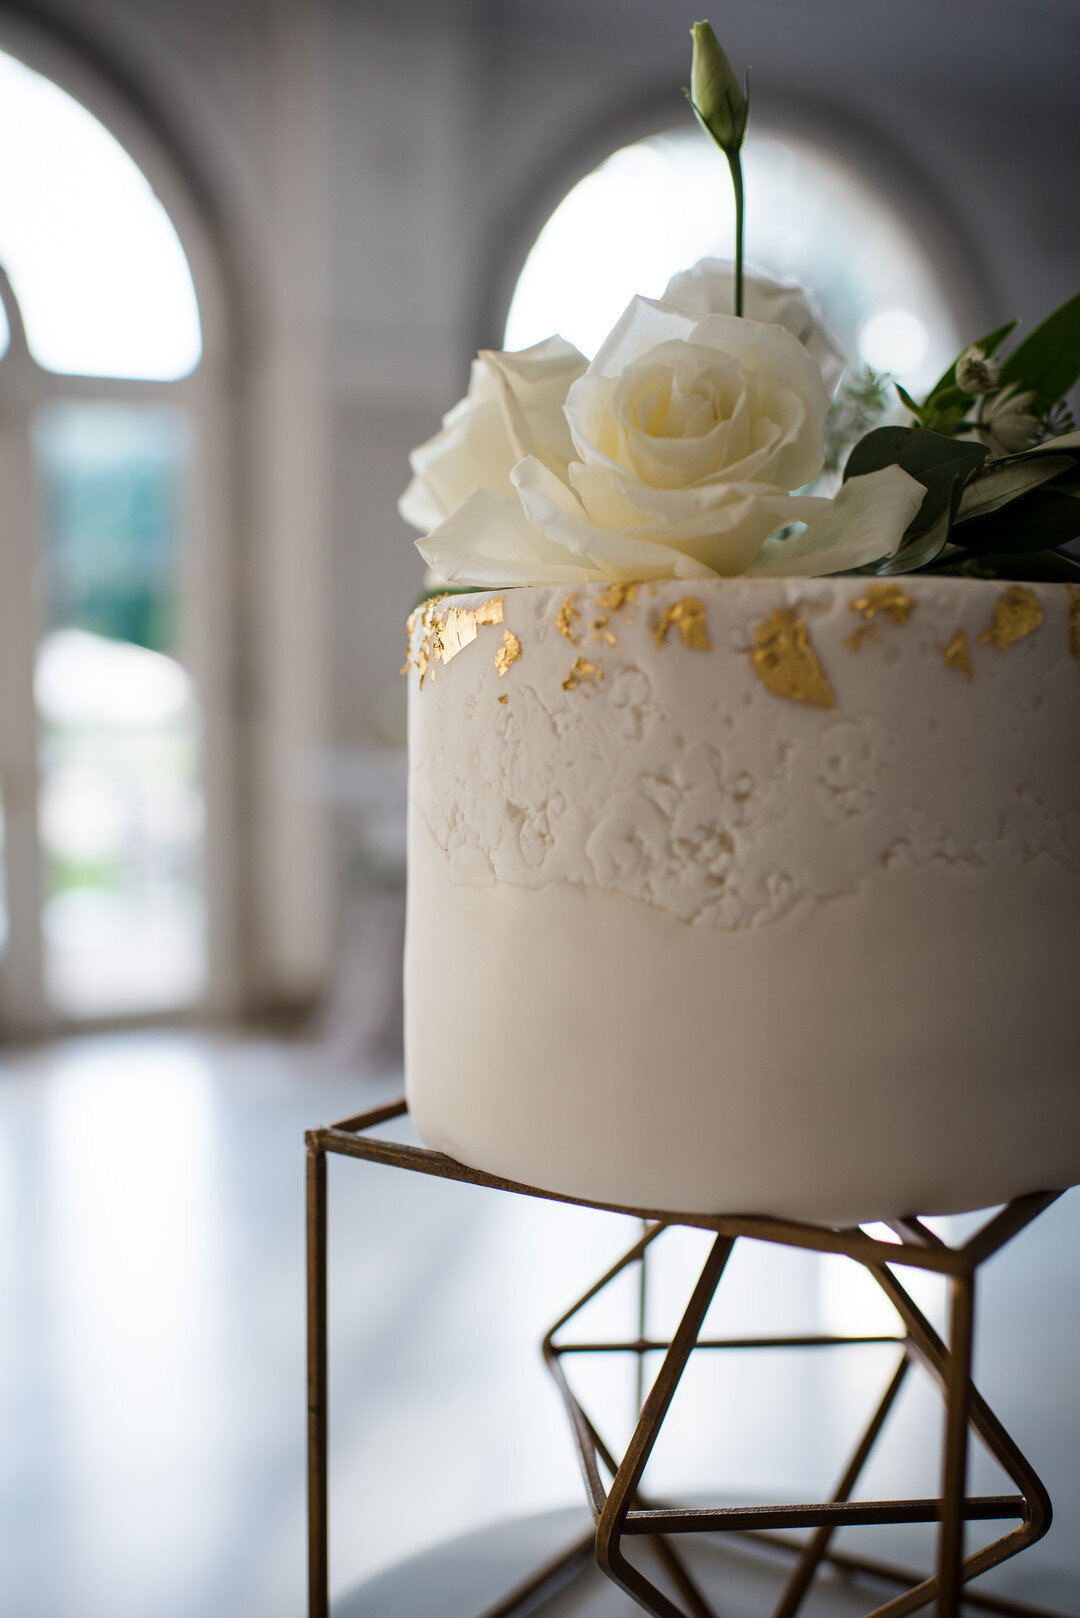 Modern wedding cake with gold speckles: Golden Hour Armour House Chicago Wedding captured by Inspired Eye Photography featured on CHI thee WED. Find more wedding ideas at CHItheeWED.com!